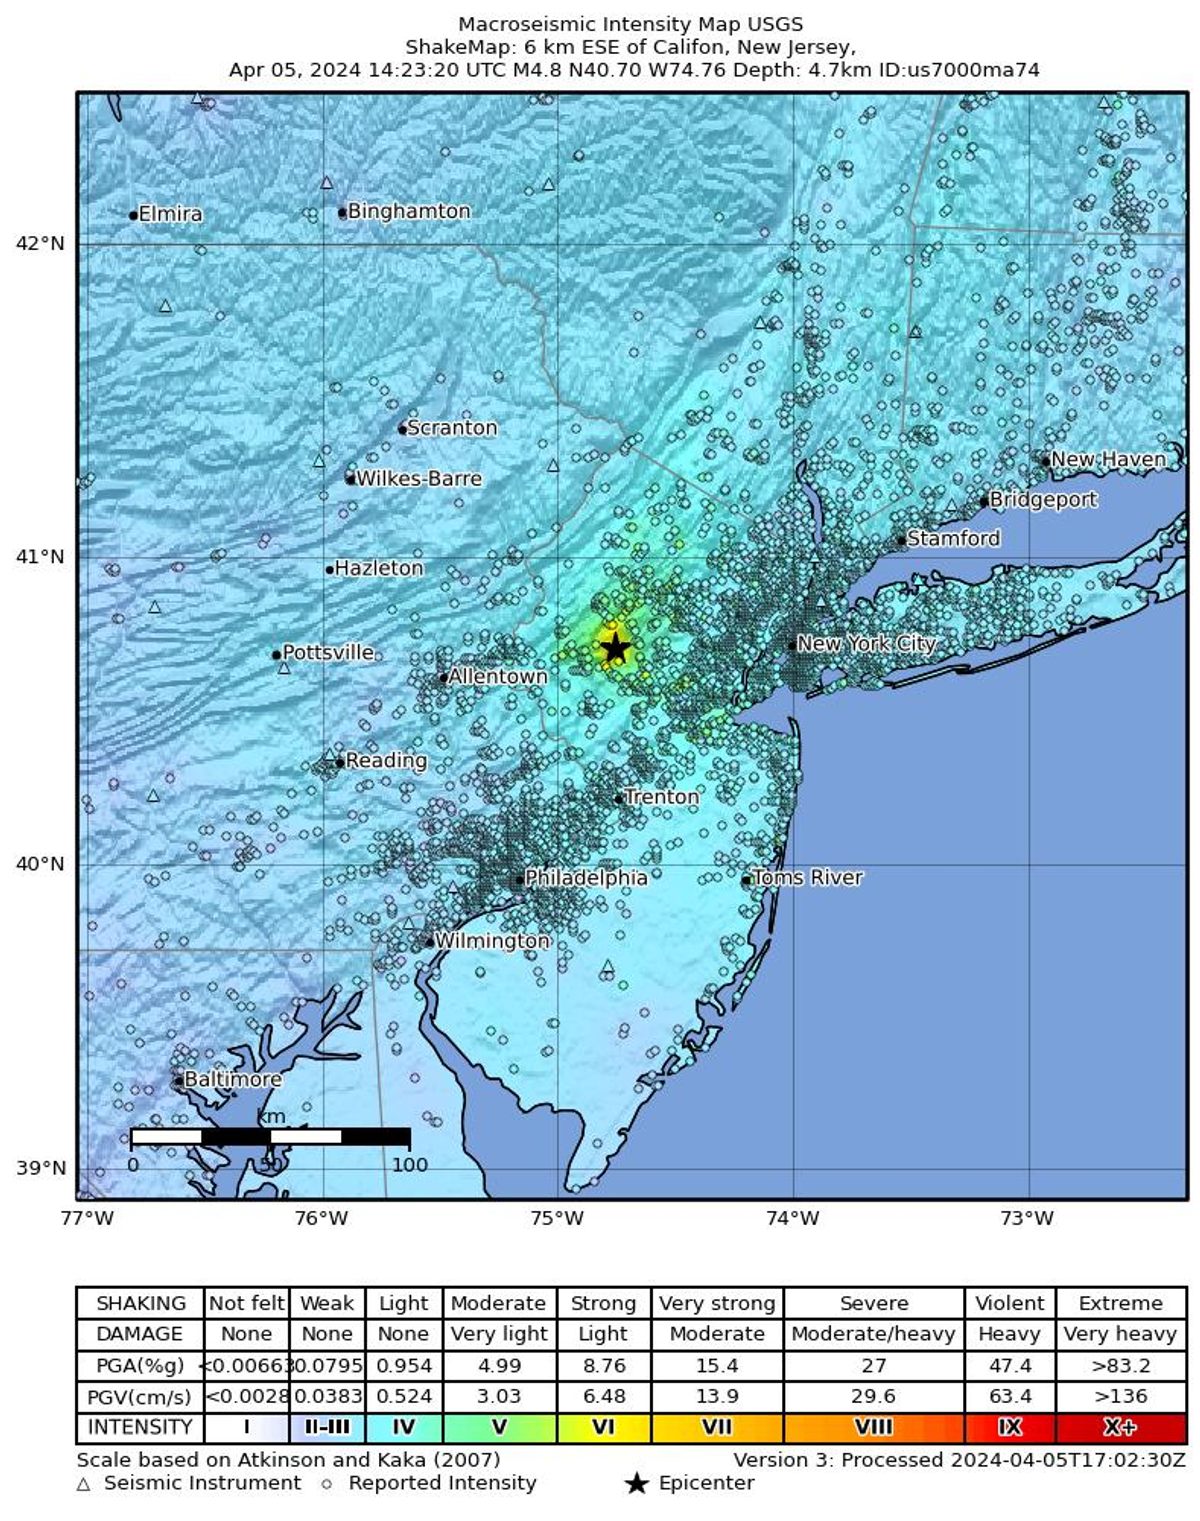 The widely referred "New York" earthquake on April 5, 2024 actually had an epicenter in New Jersey, as seen by the colors on the map.